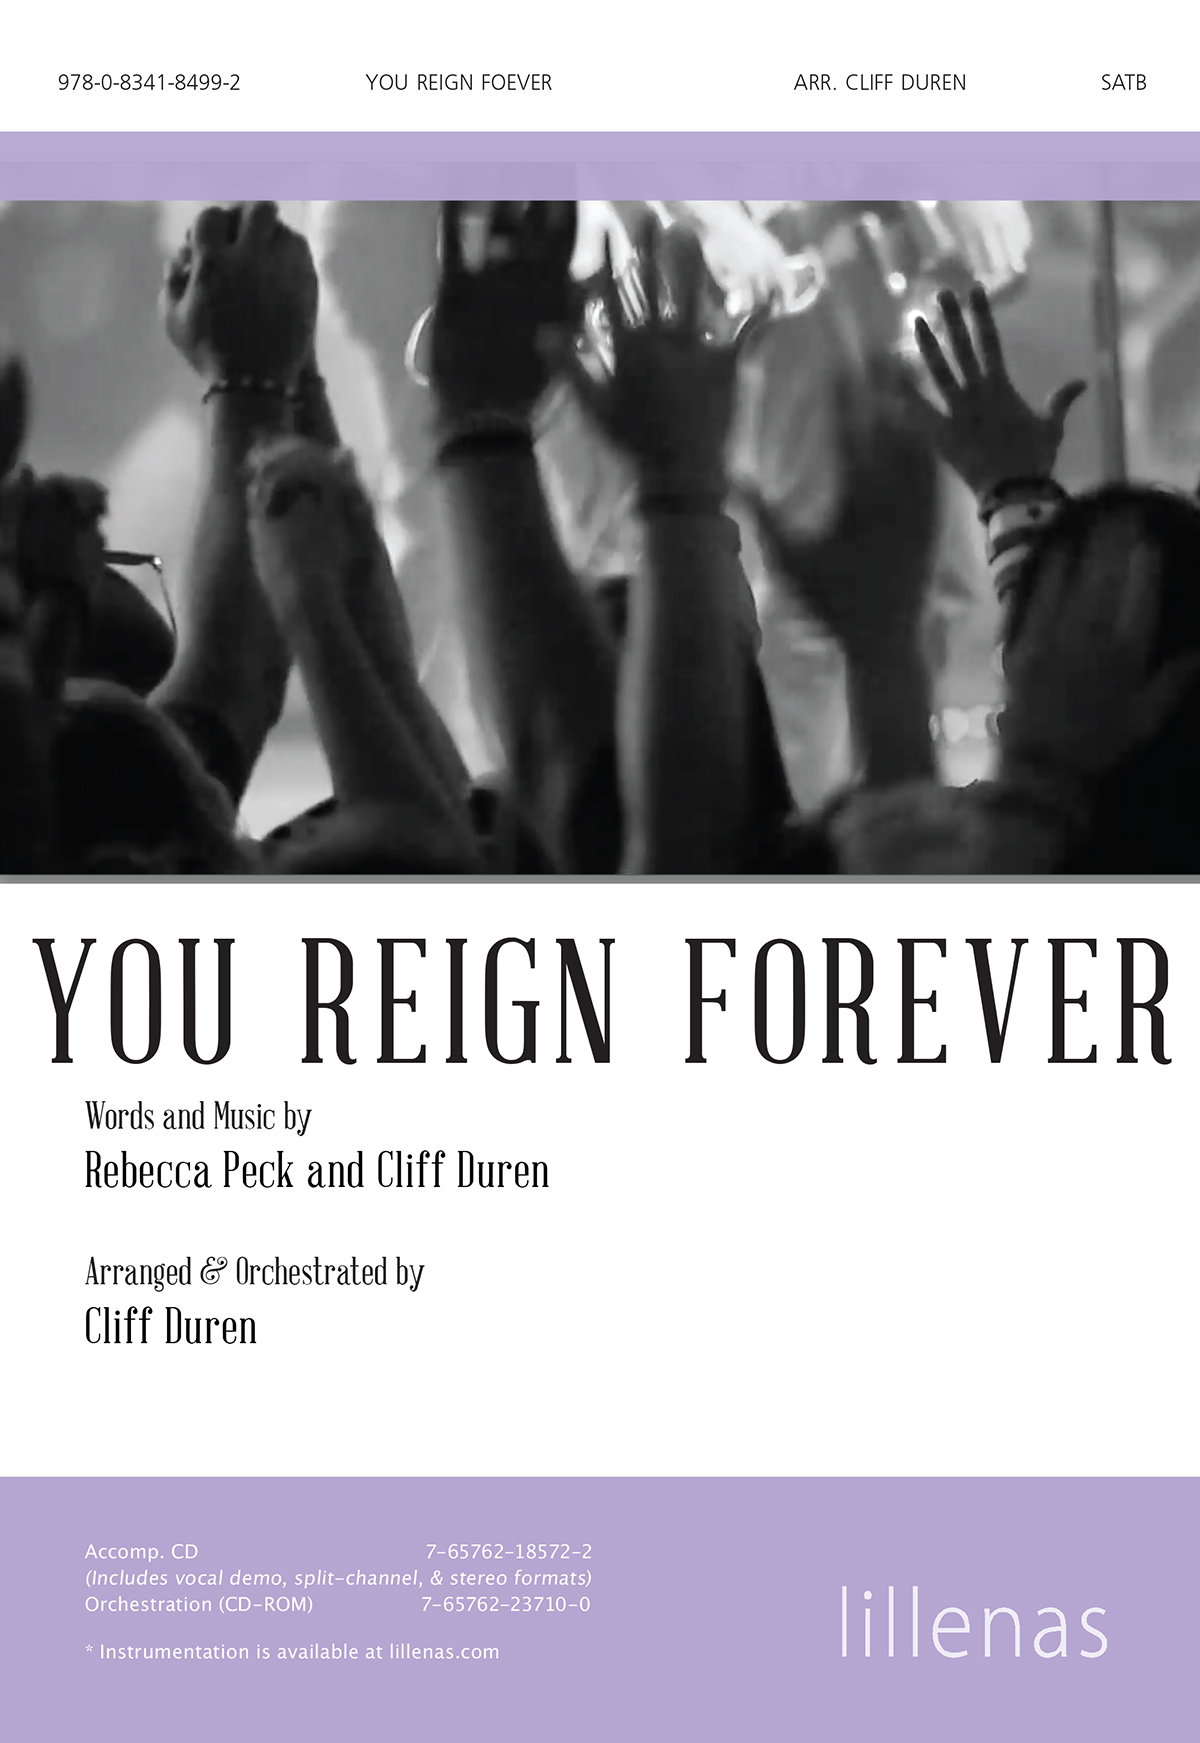 You Reign Forever